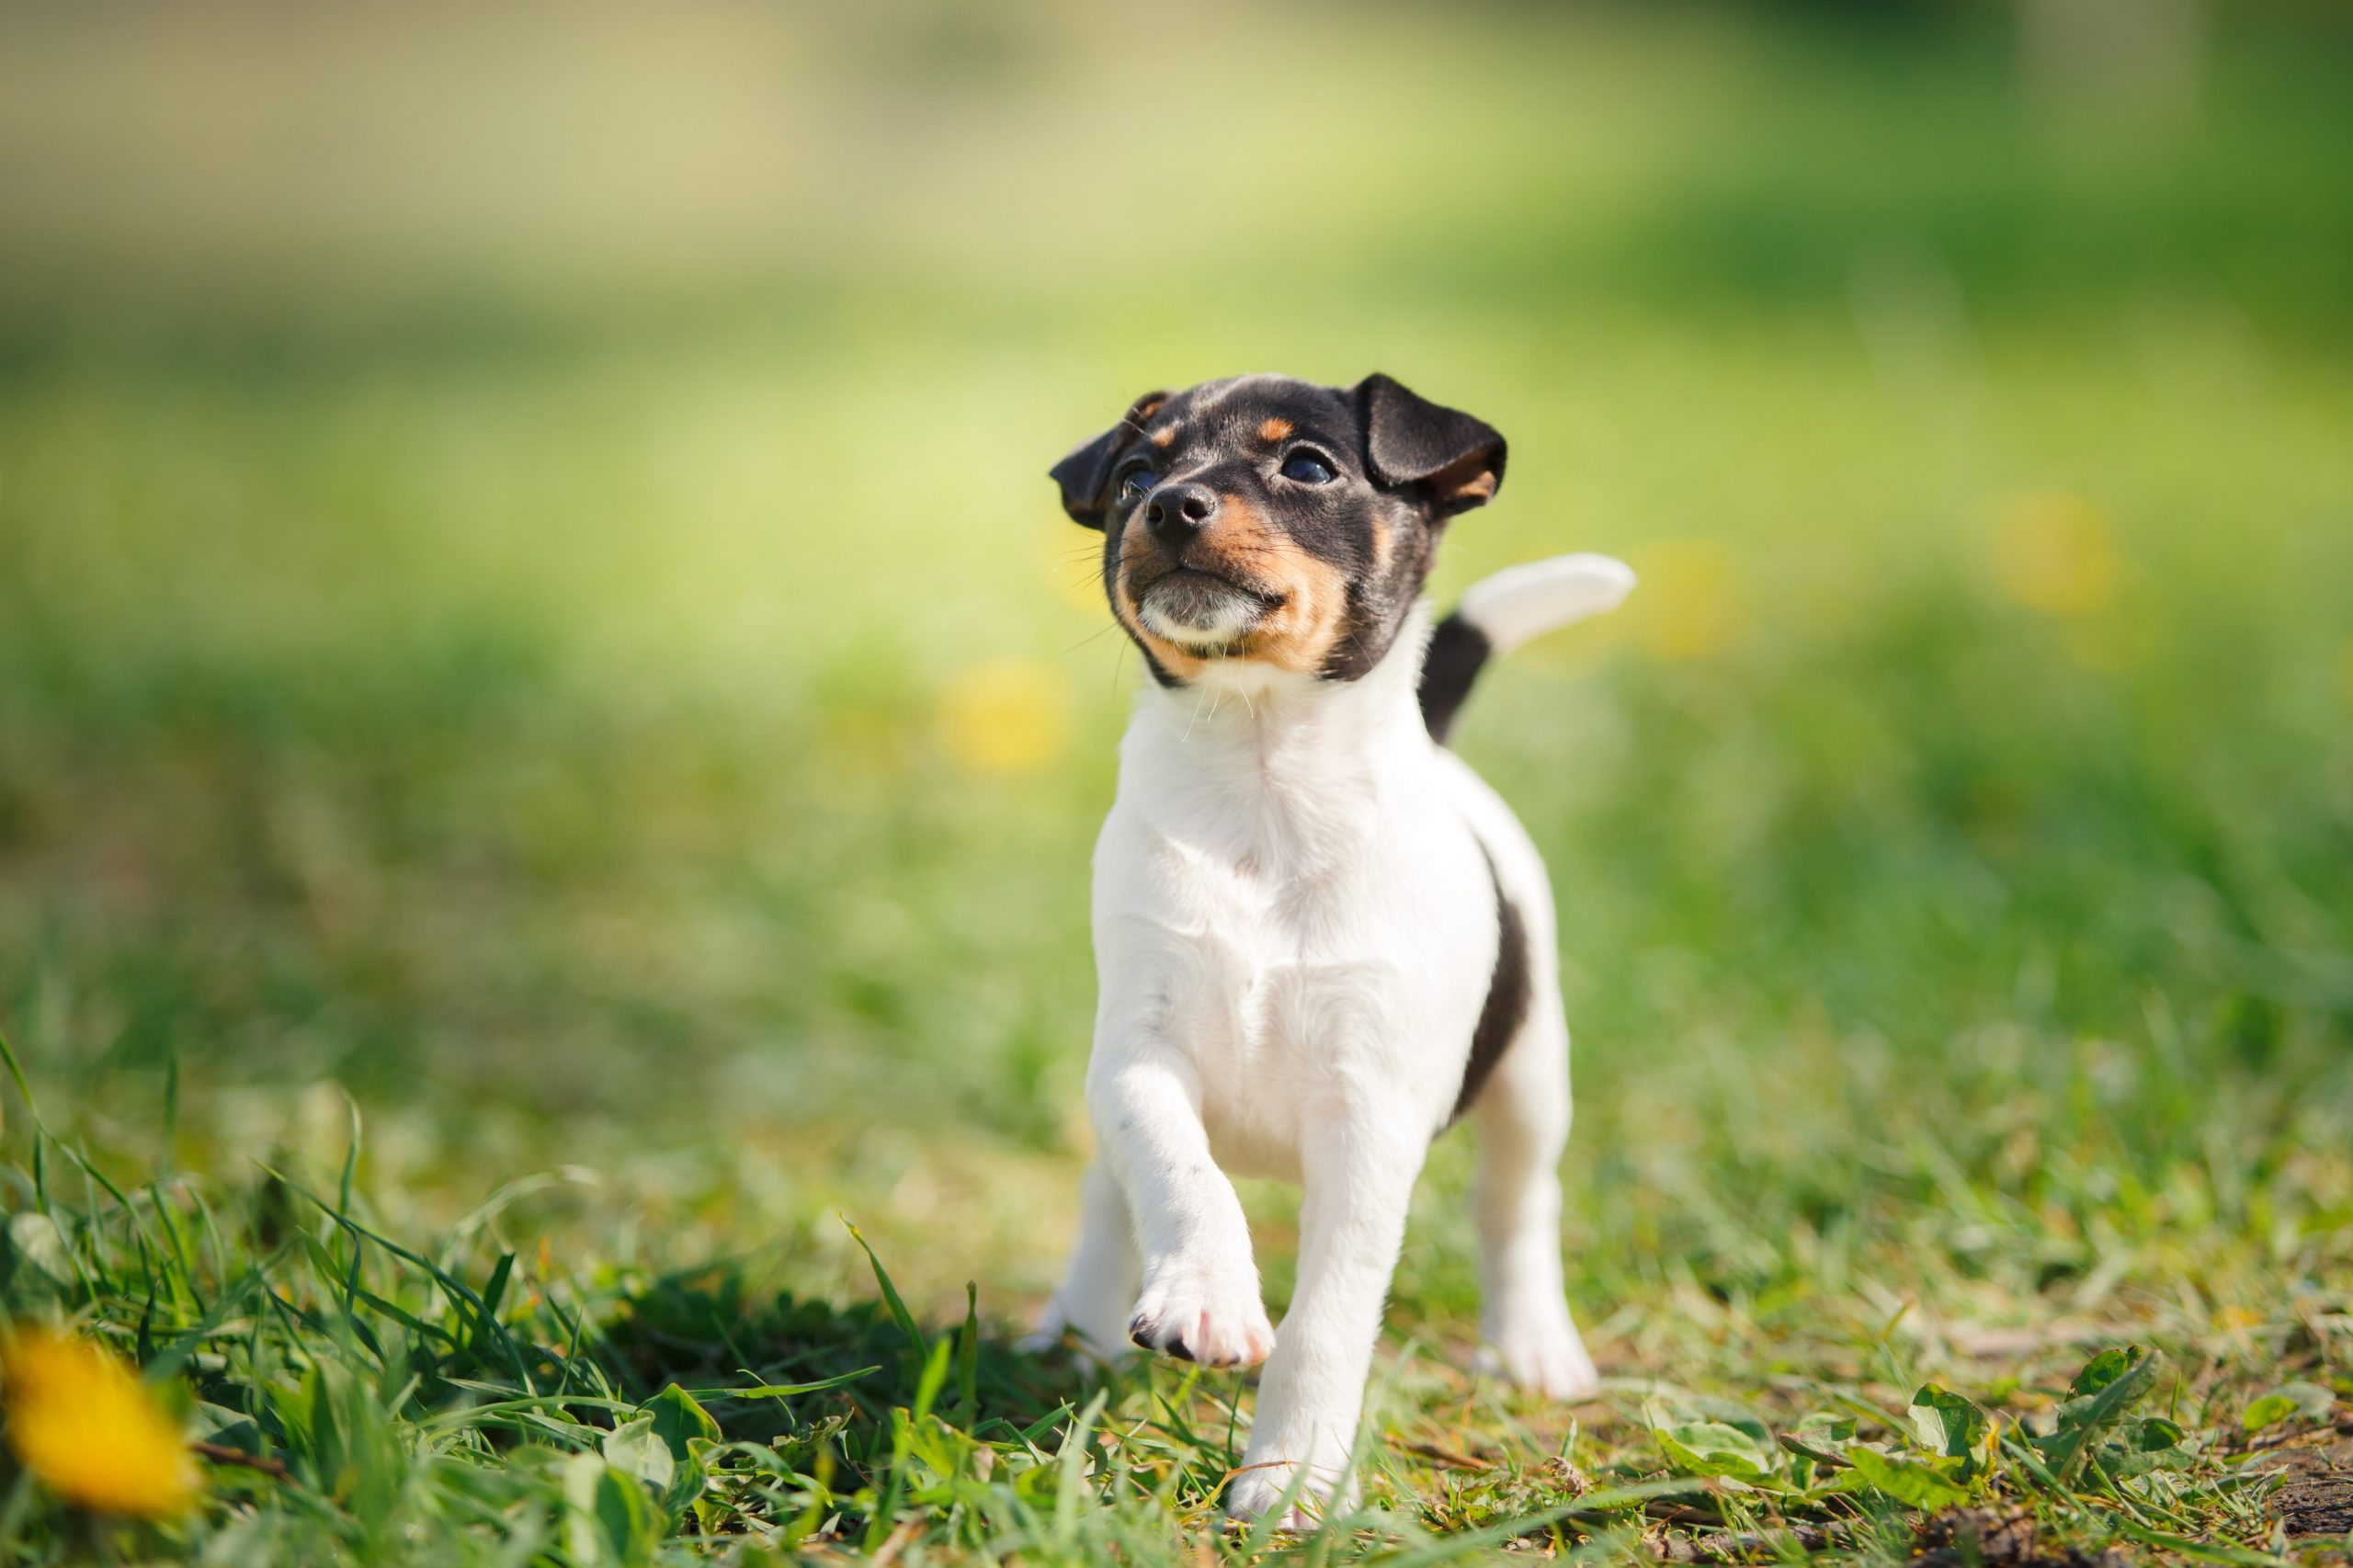 5 Fun Facts About Fox Terriers